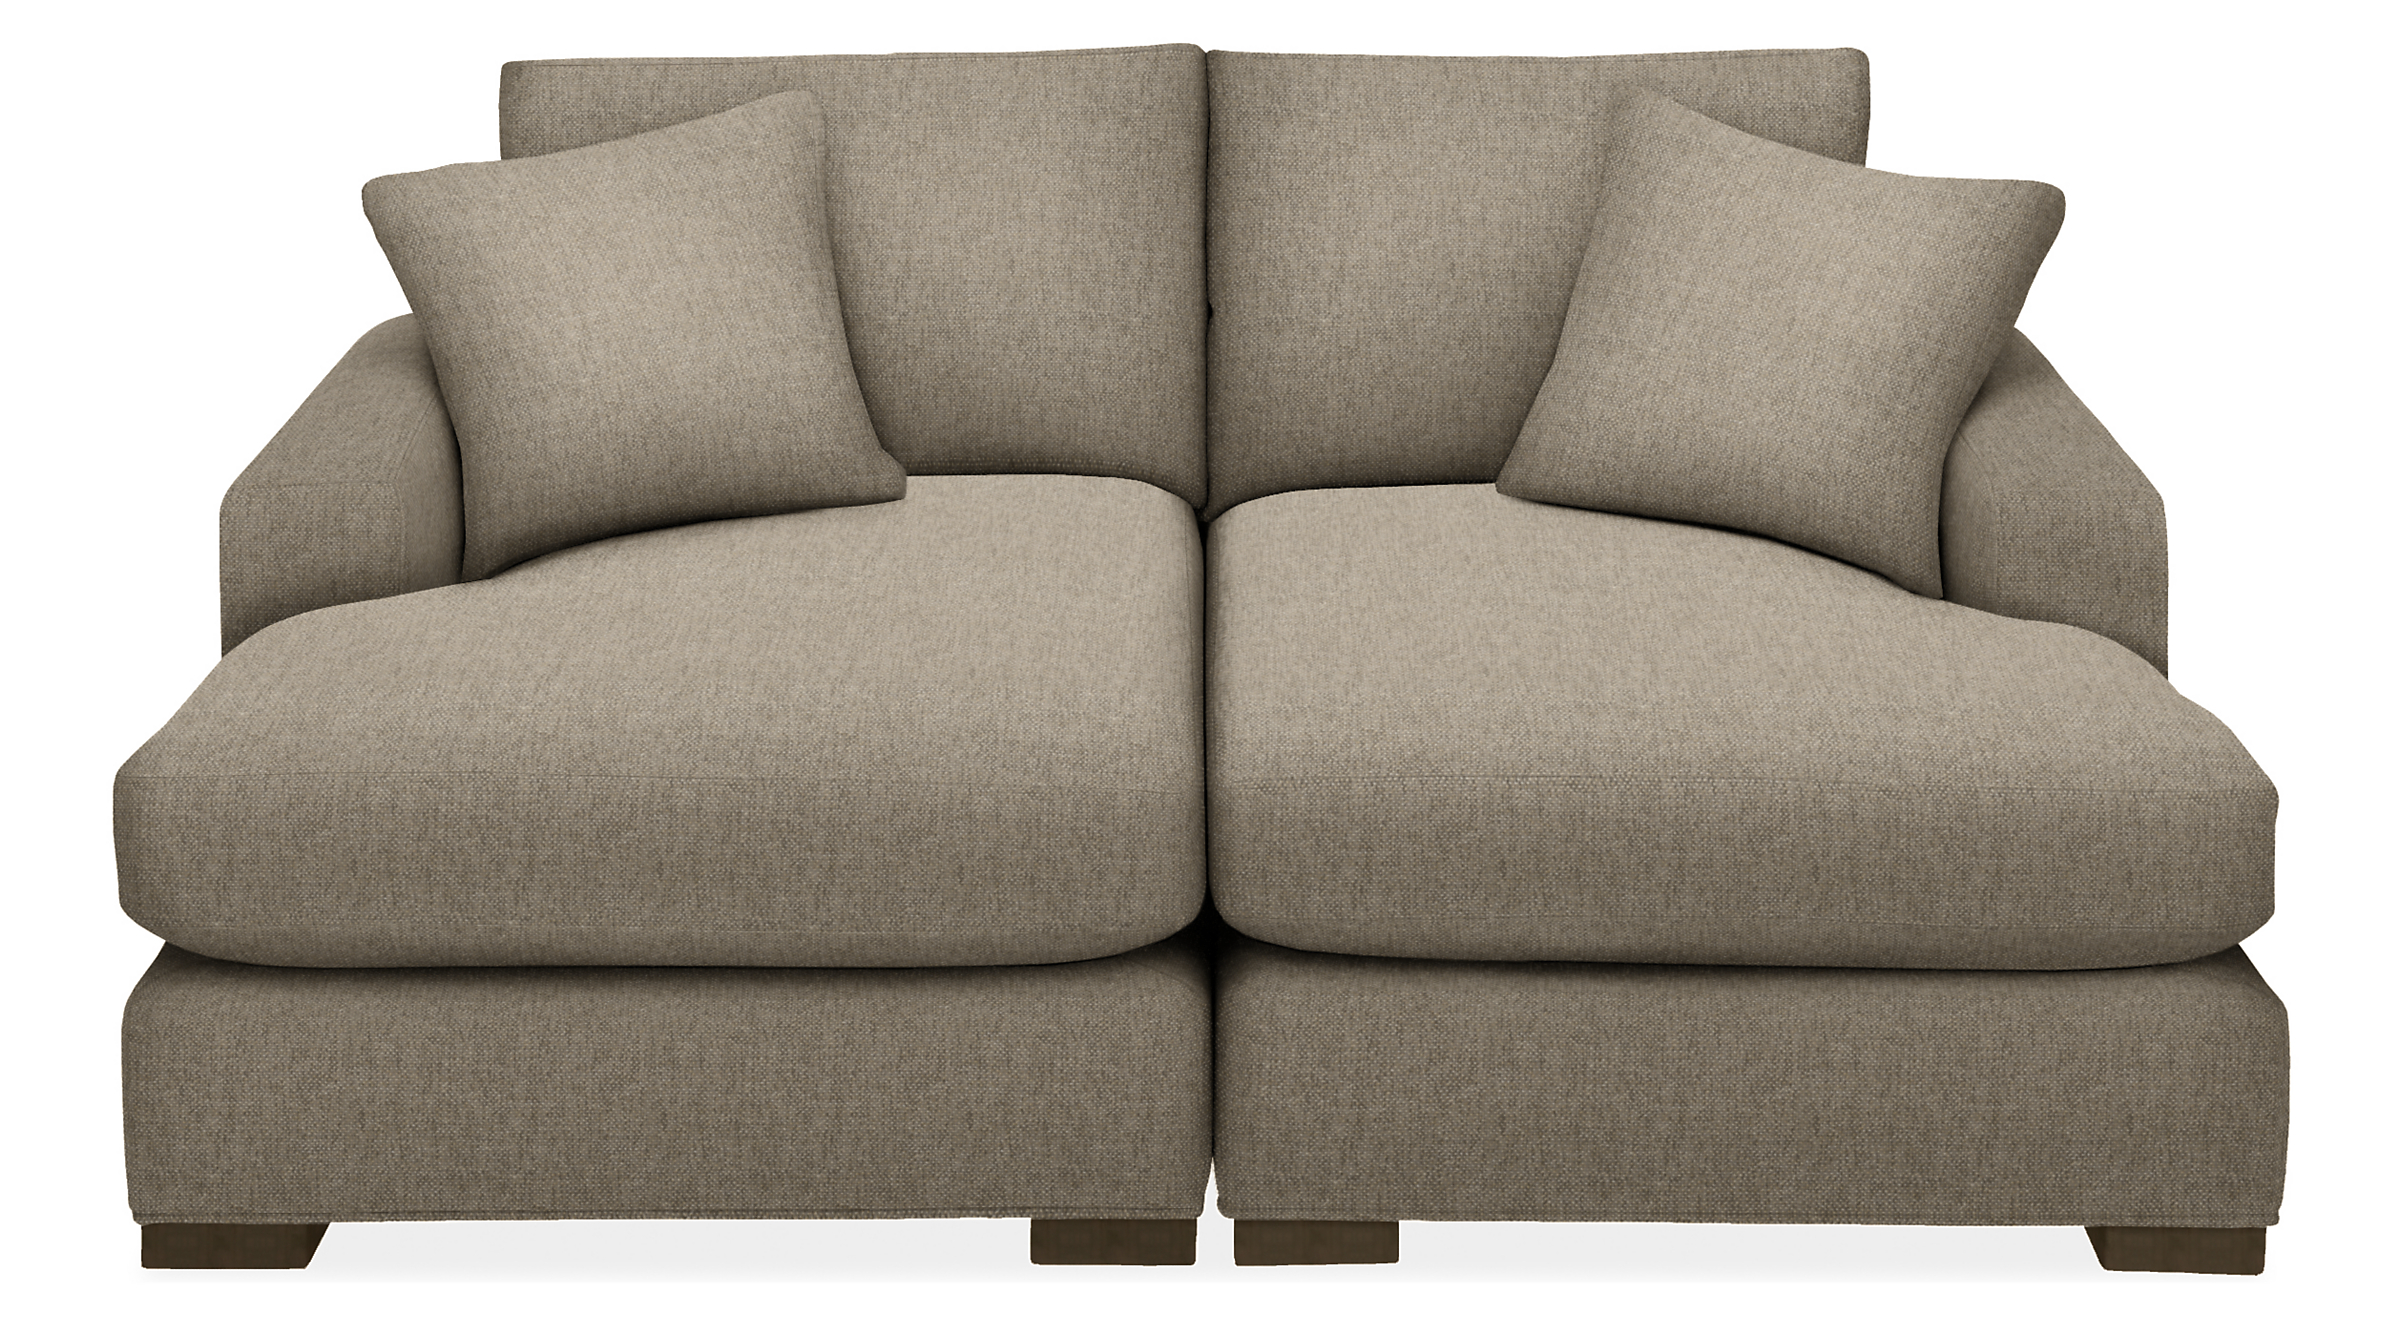 Metro 74x64" Two-Piece Double Chaise Sectional